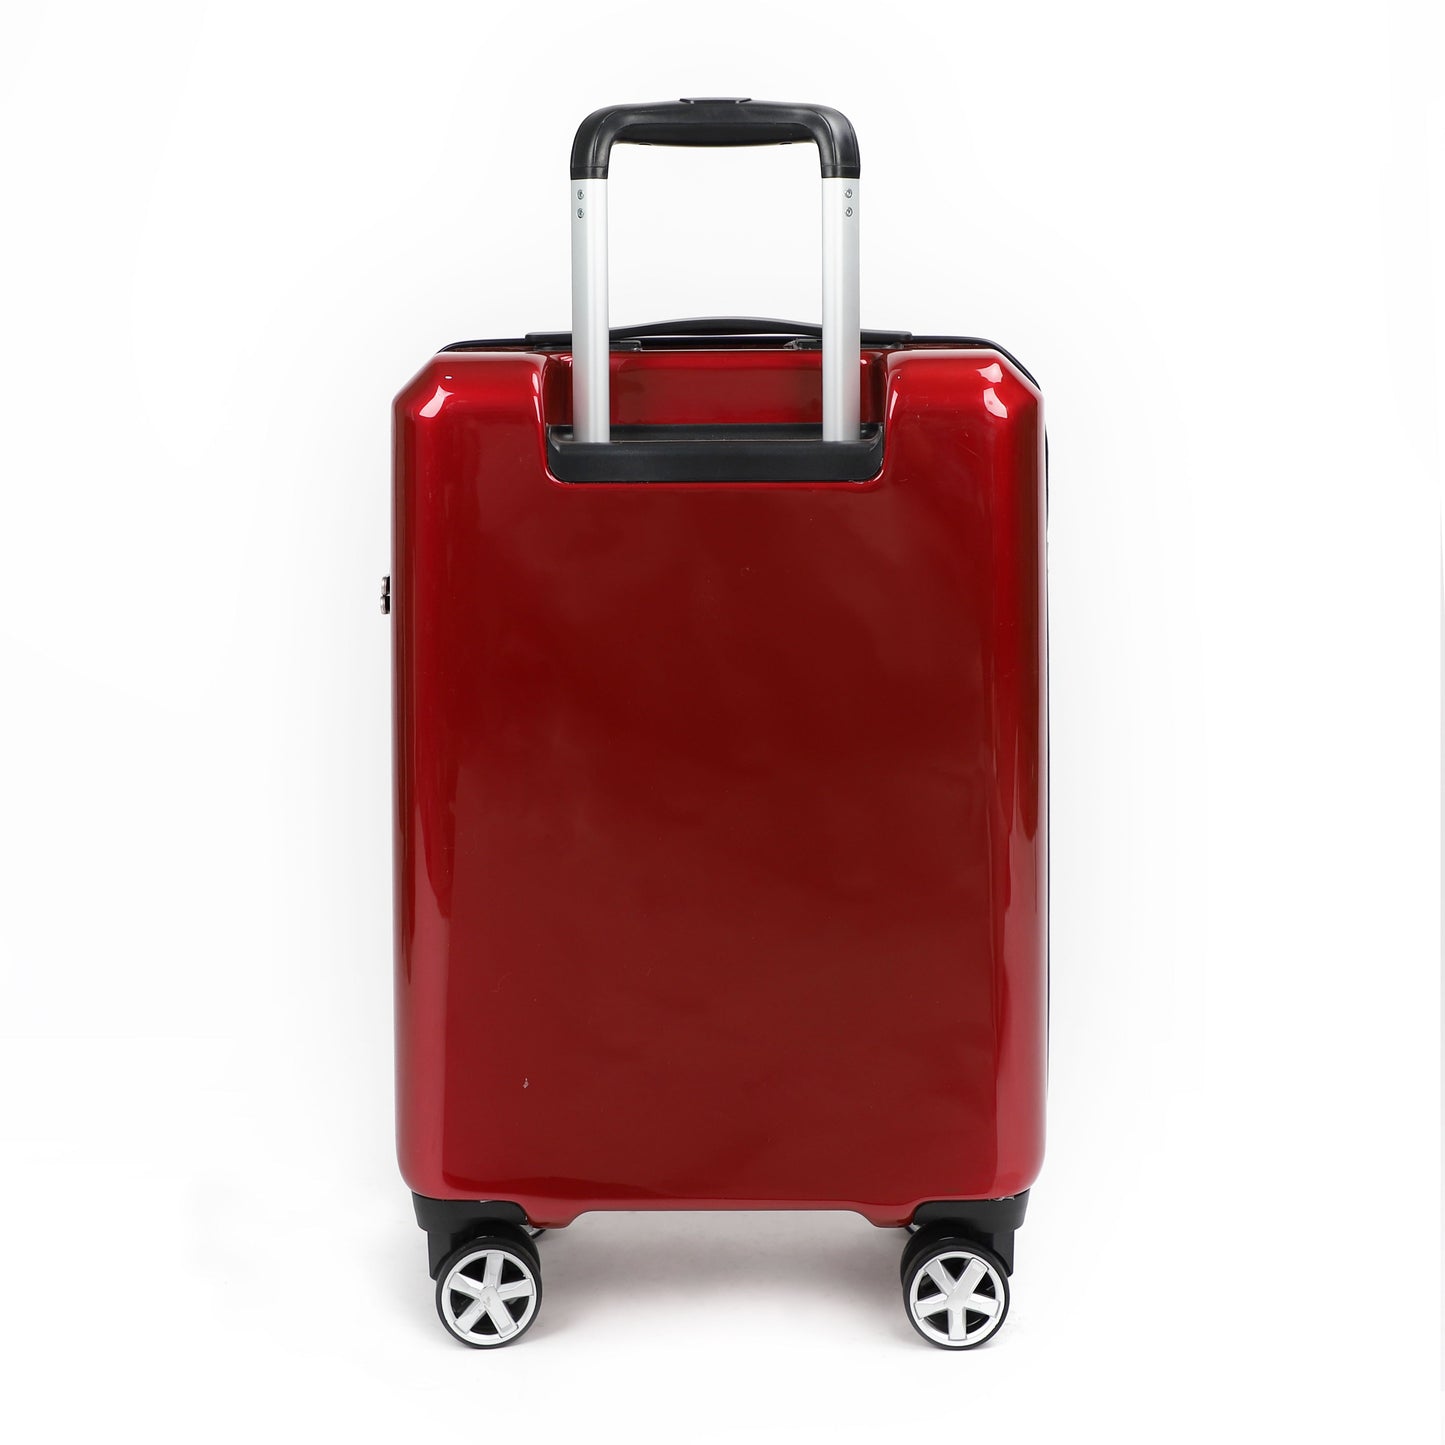 Airline_Carry_On_Luggage_Red_right_view_T1978155002